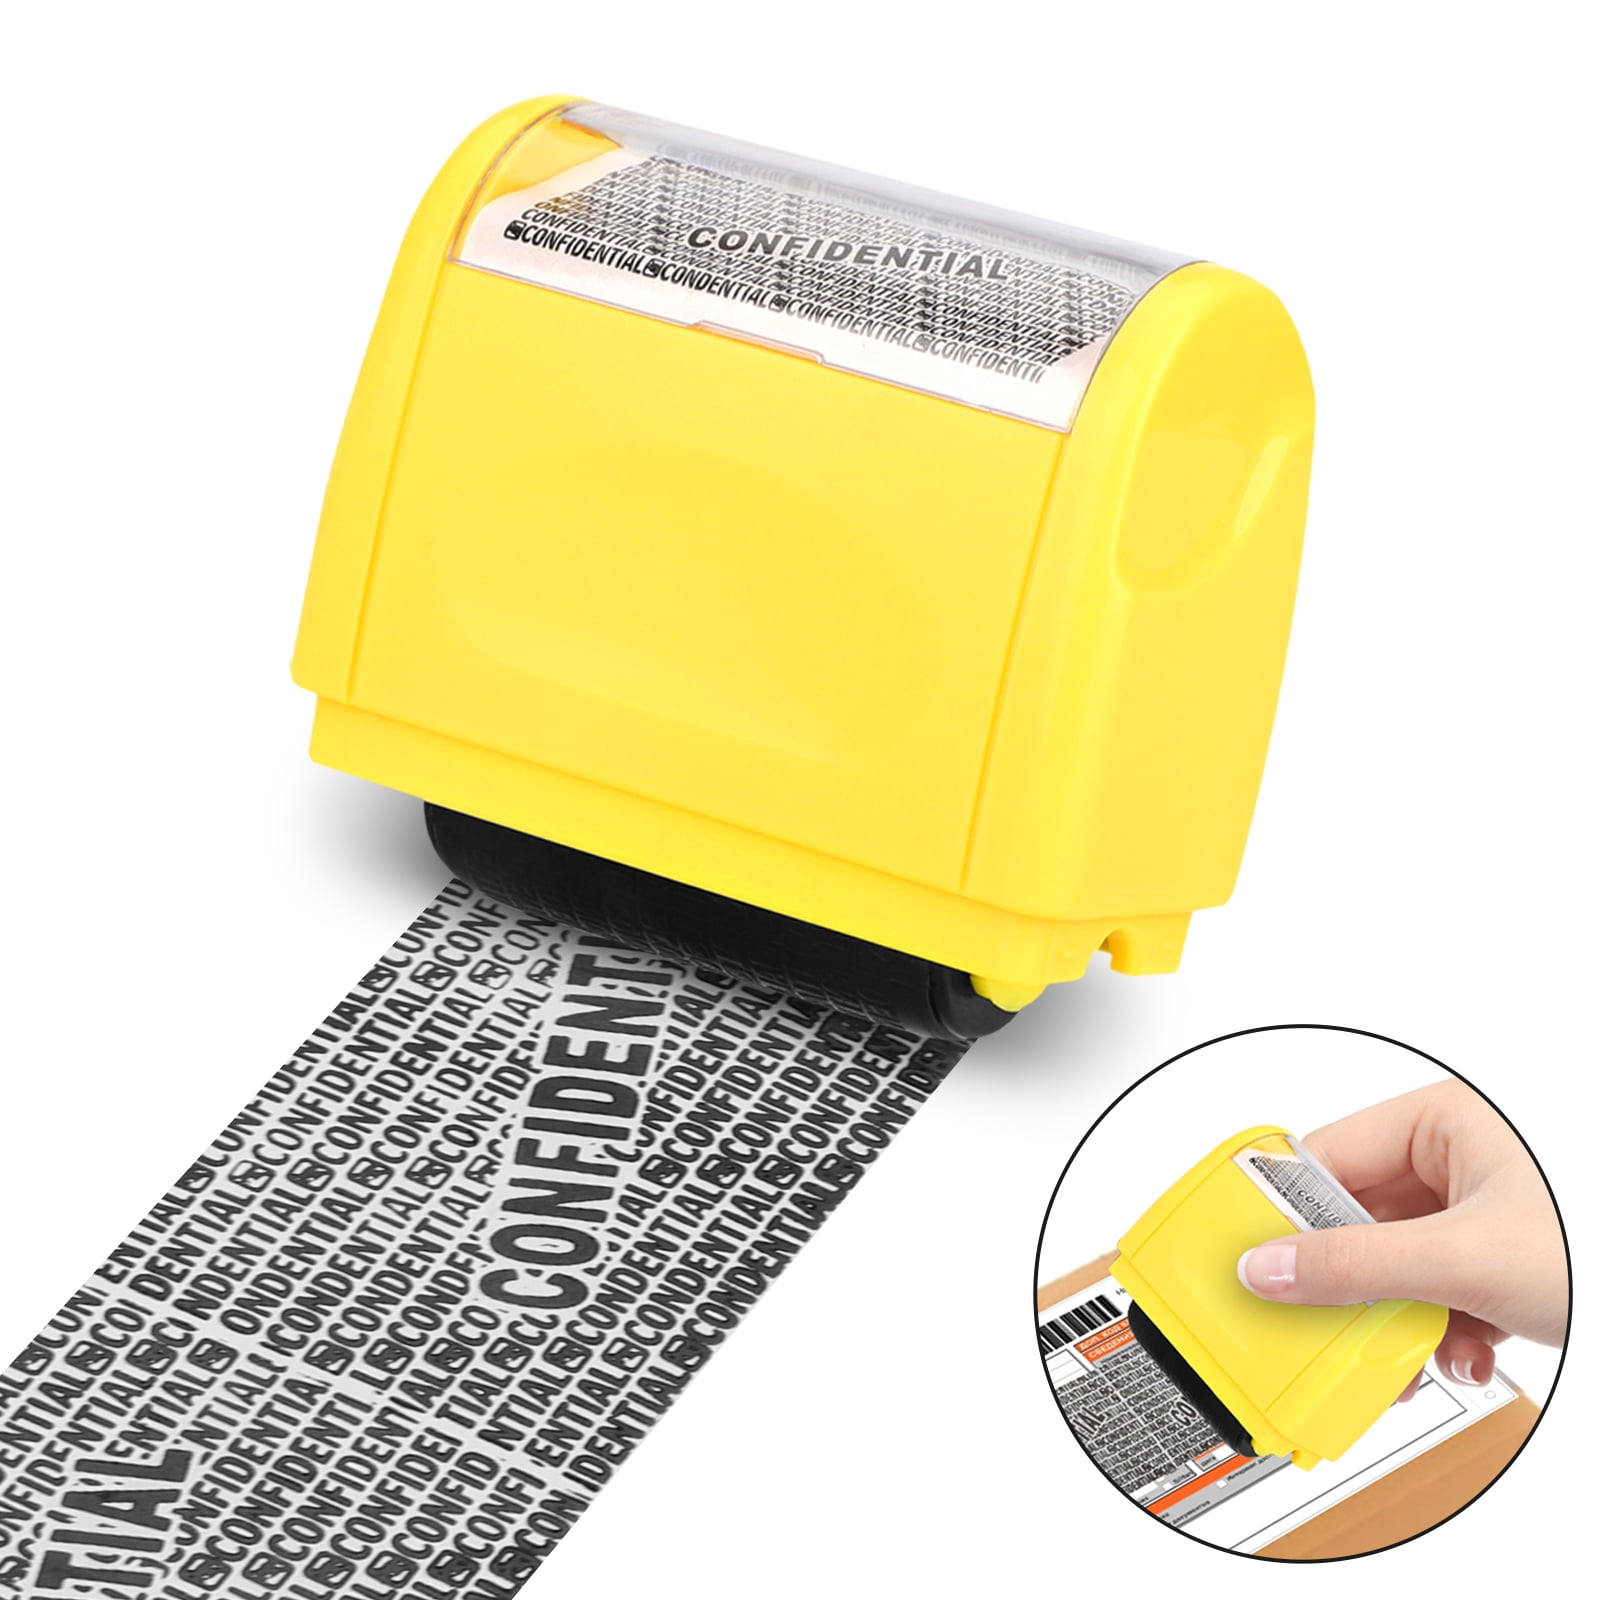 Stamp Roller Black Out Stamps ID Identity Theft Protection Self Ink Roll Guard 615317296871 